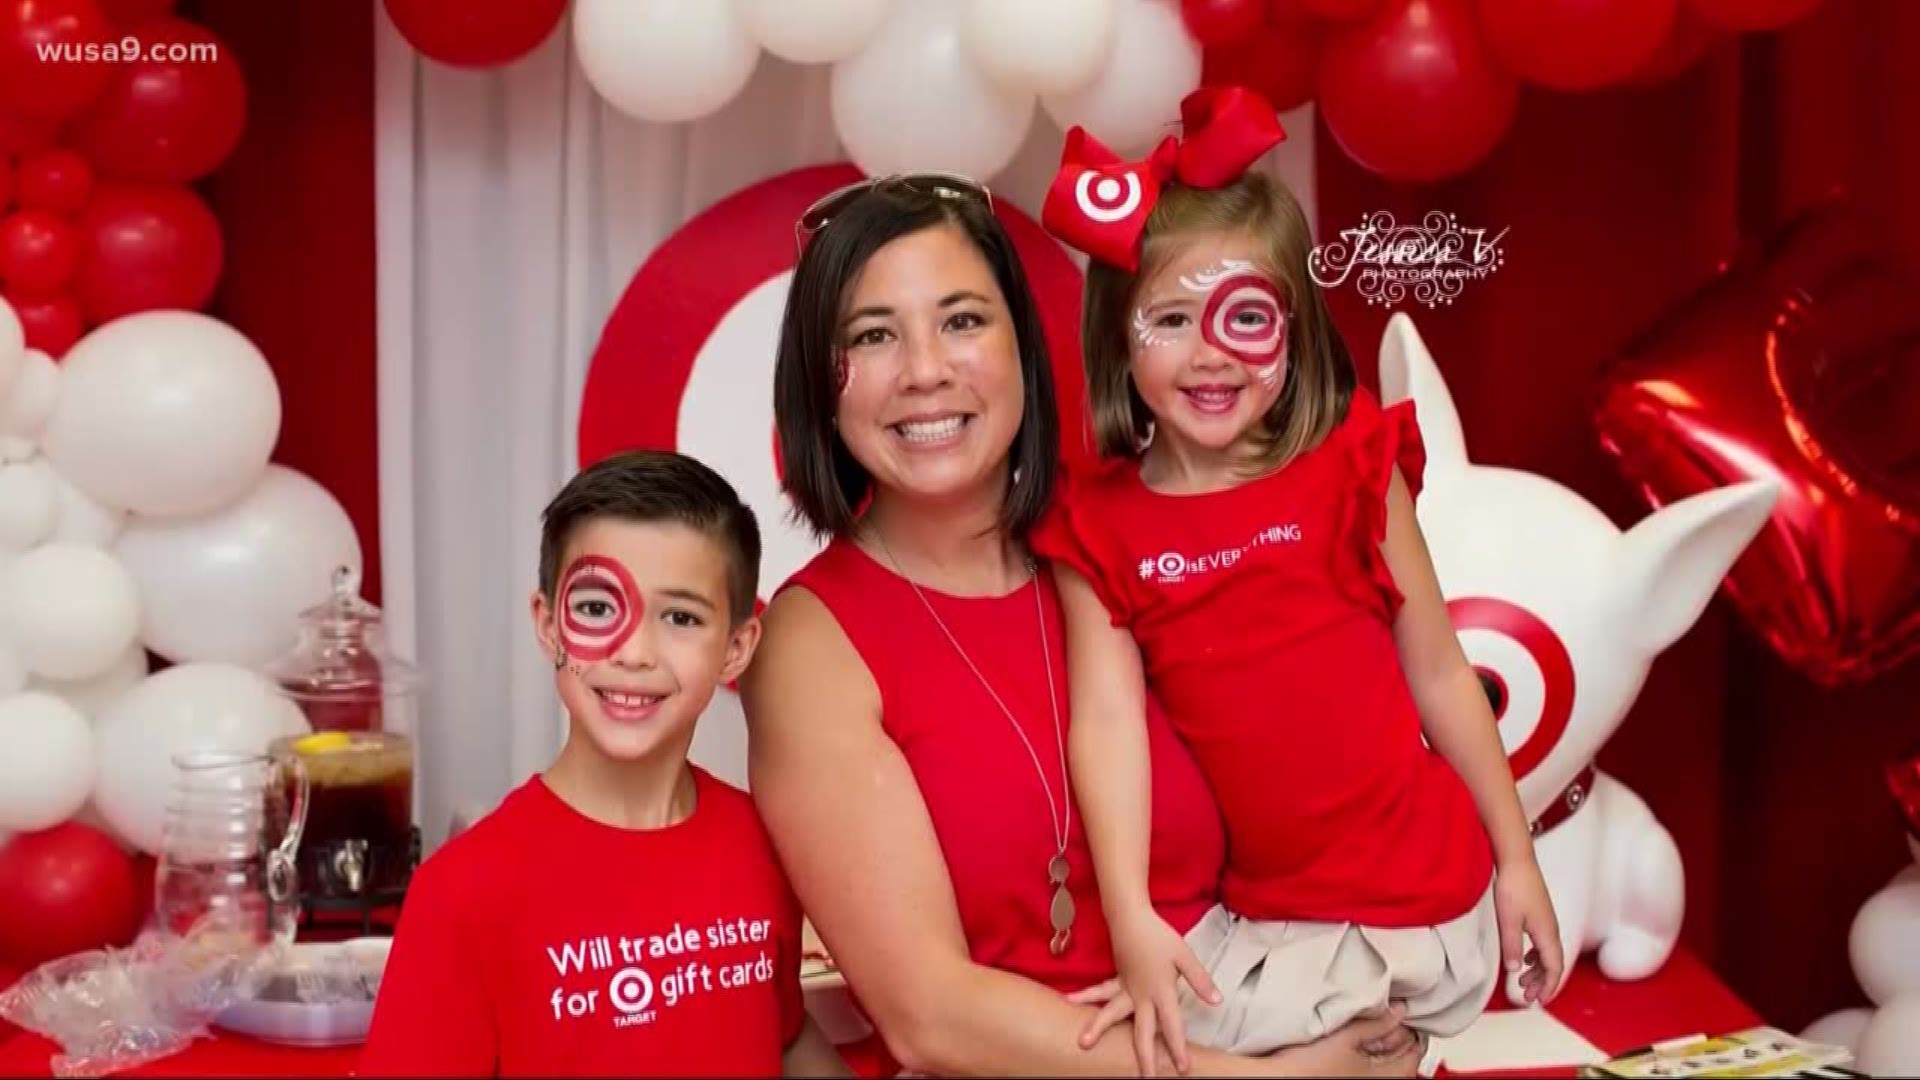 How cute is this?! A 5-year-old girl loves Target so much she had her birthday party there.